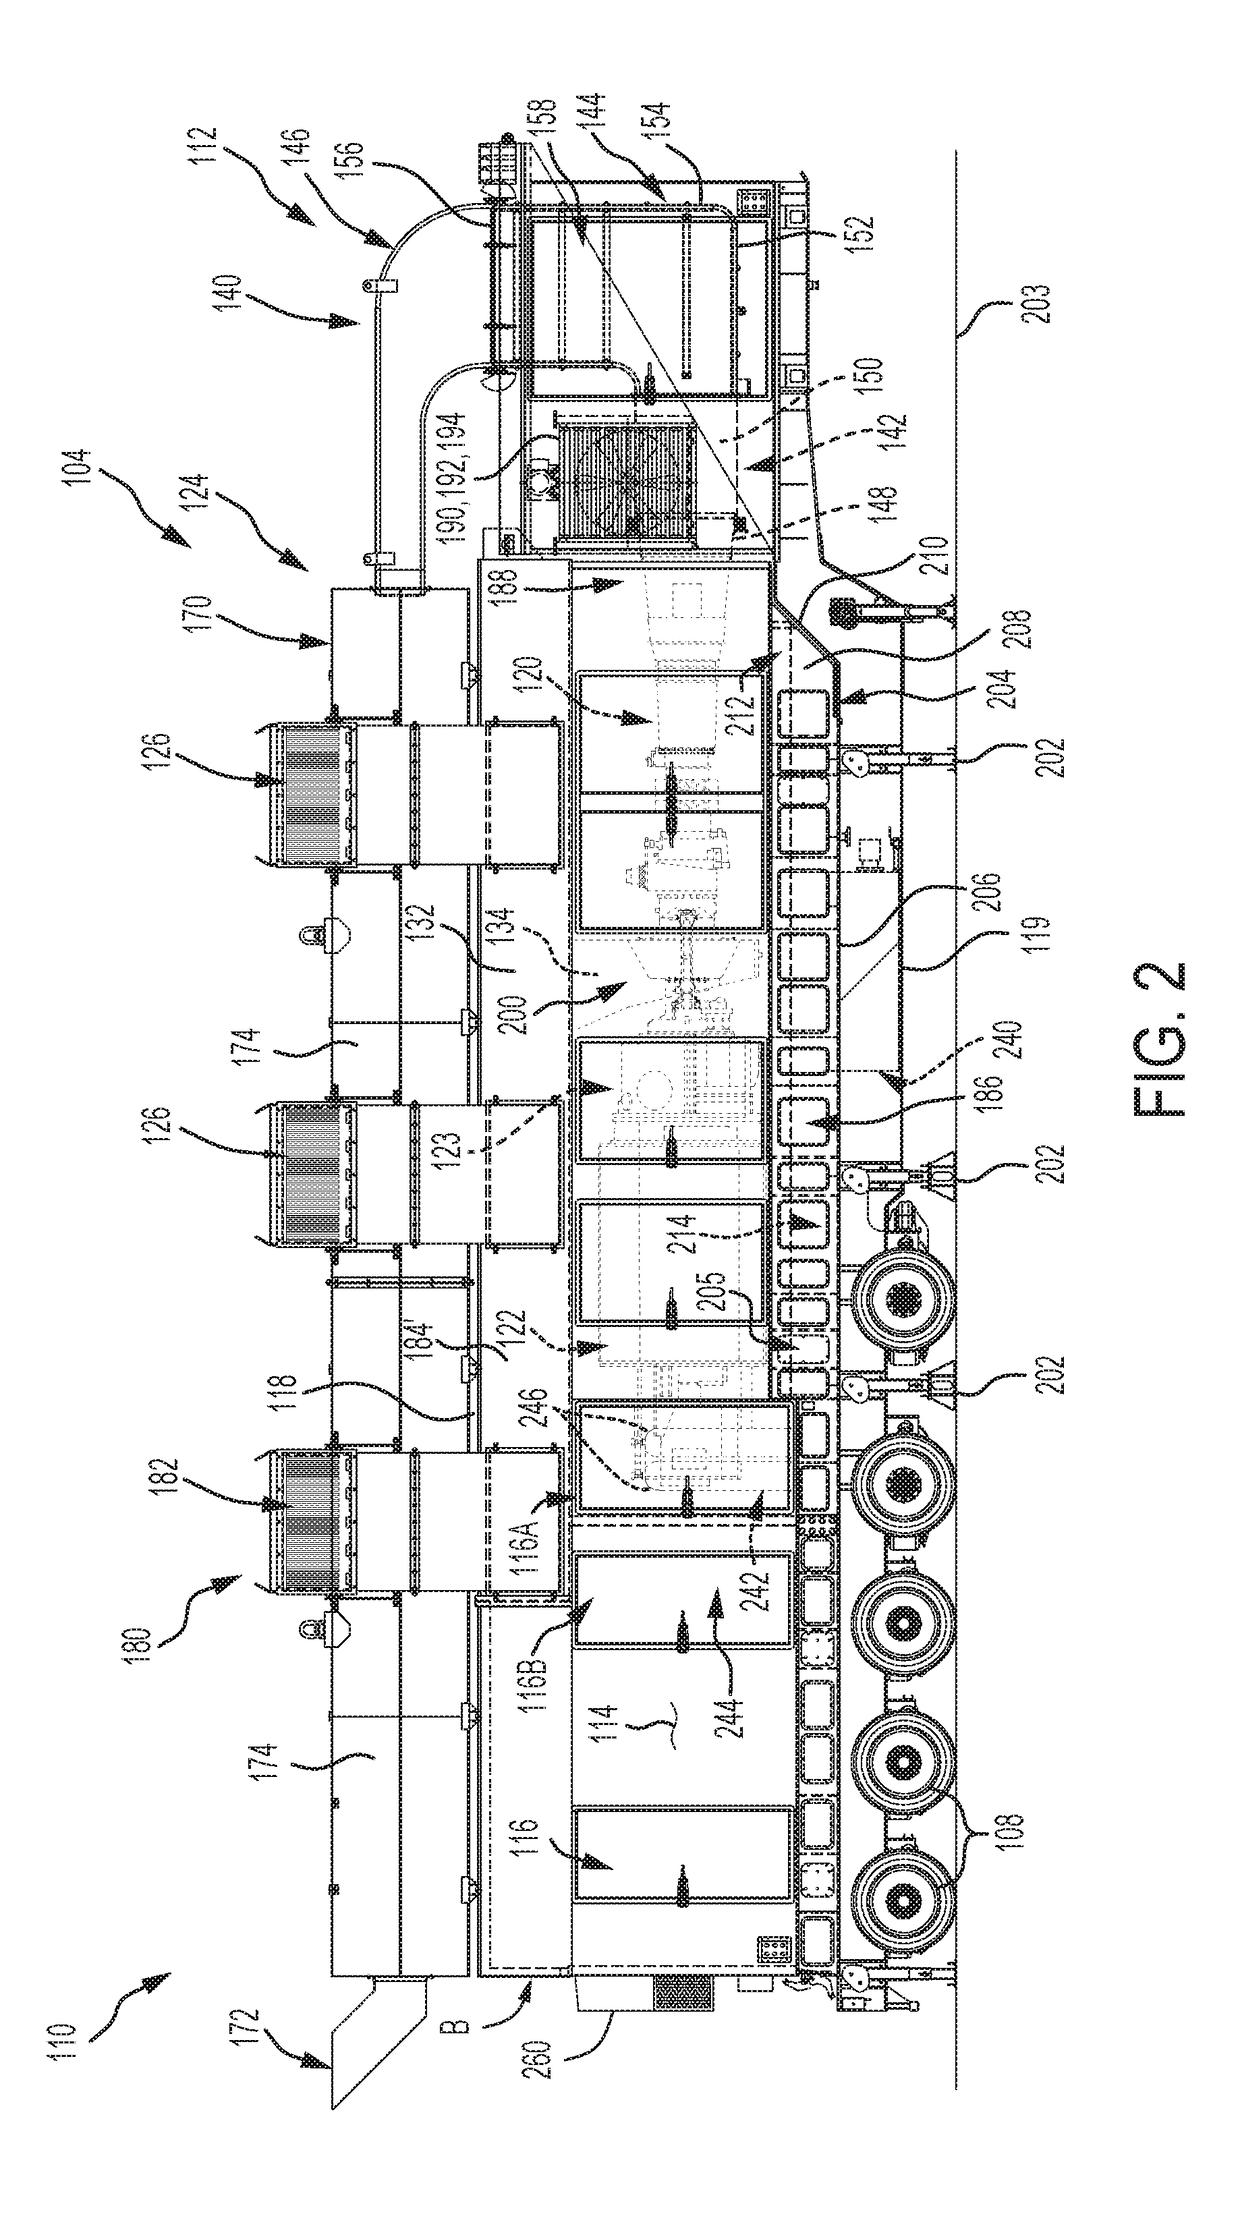 Mobile power generation system including air filtration